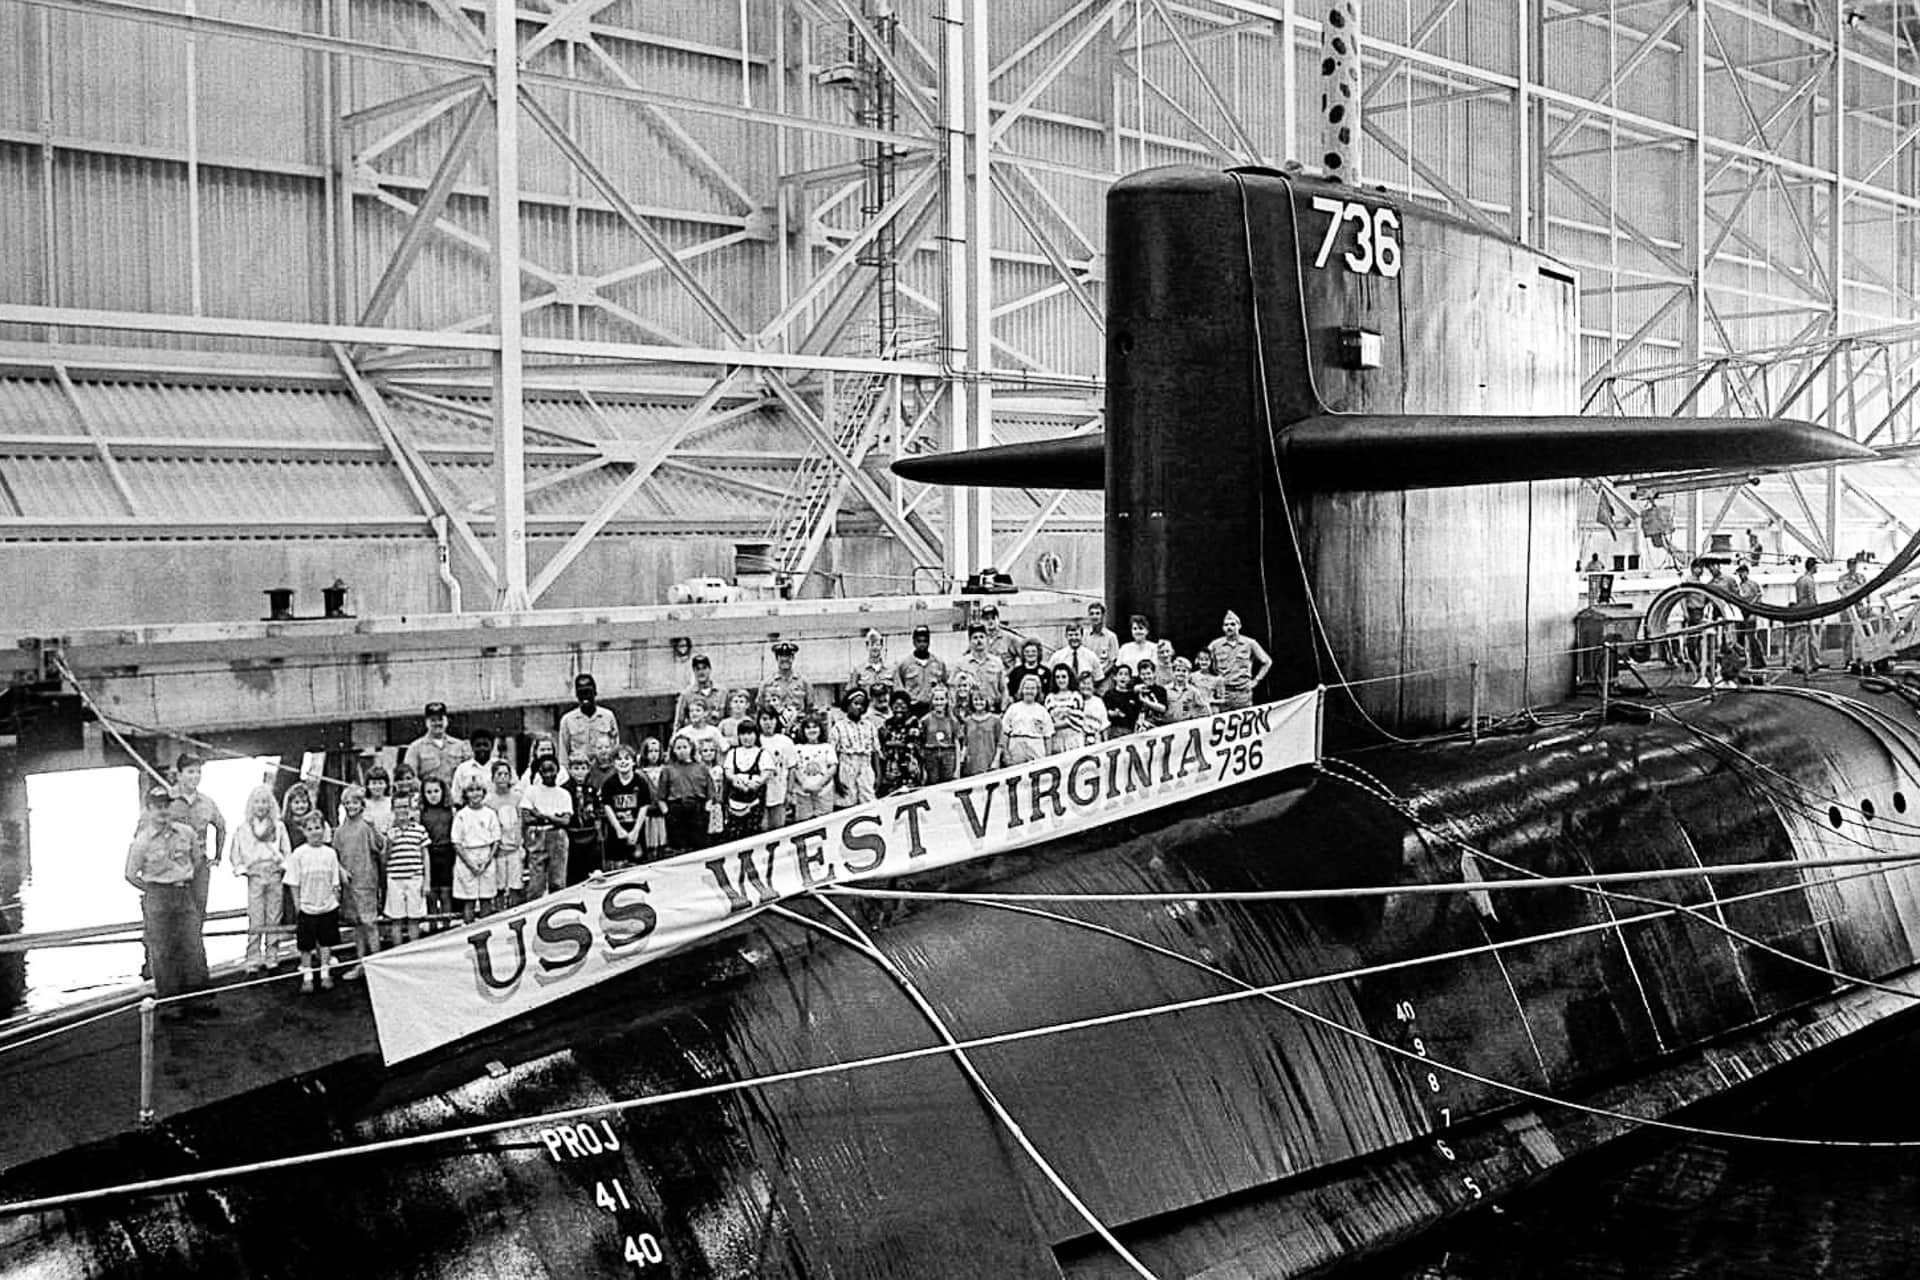 Fourth and fifth grade honor students from the Matilda Harris Elementary School pose for a photograph on deck with gold crew members of the nuclear-powered strategic missile submarine West Virginia (SSBN-736), 18 Sep 1991. The students are being treated to an hour-long tour of the vessel.